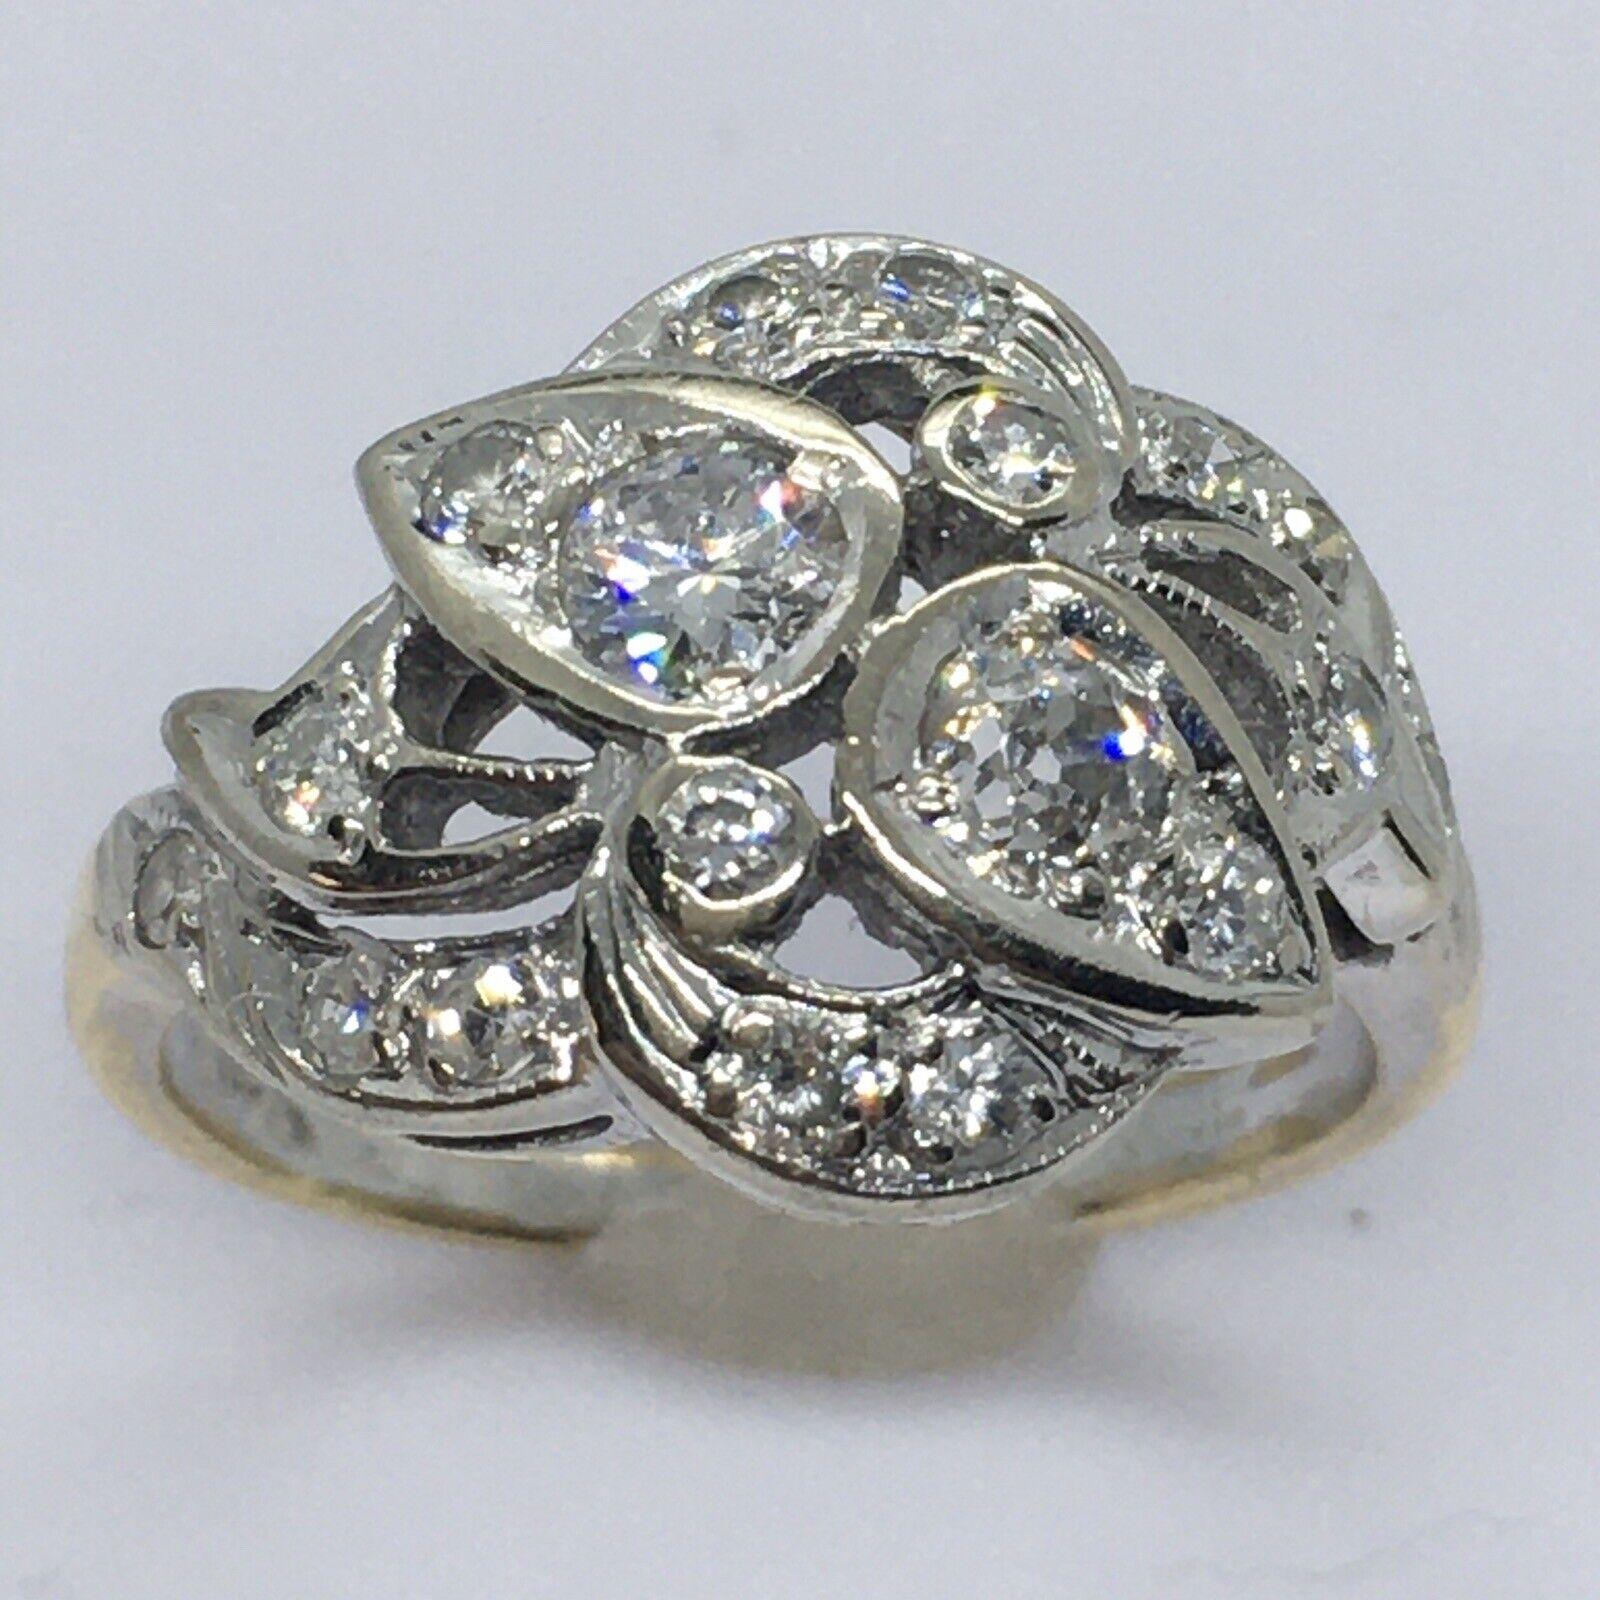 
Antique 1920s Art Deco 14K gold 1/2 Carat Diamond American Filigree Ring 

weighting 3.8 gram
Size 5.25
one 3.2 mm, one 3.5 mm old cut plus 16 pieces single cut  translates to 1/2 Carat Diamond Total weight 
1/2 inch wide on top
Marked and tested